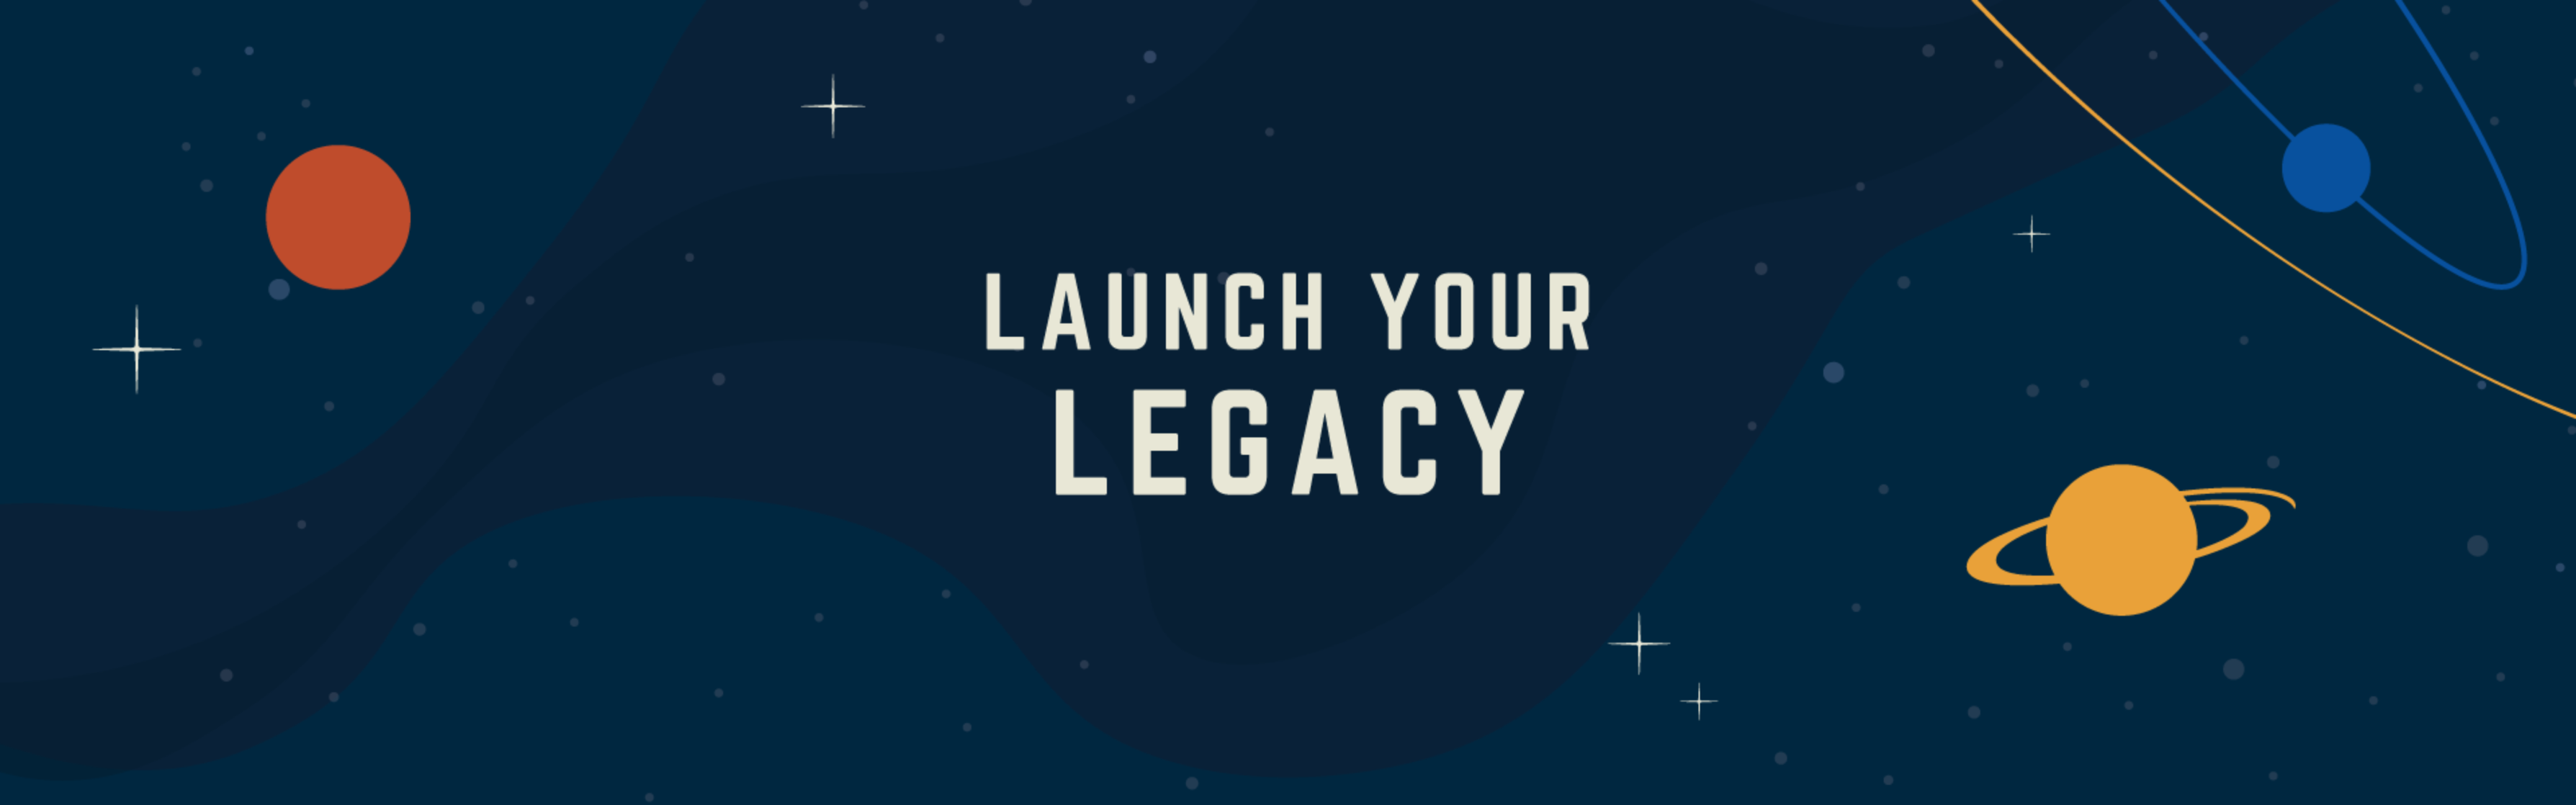 Launch Your Legacy